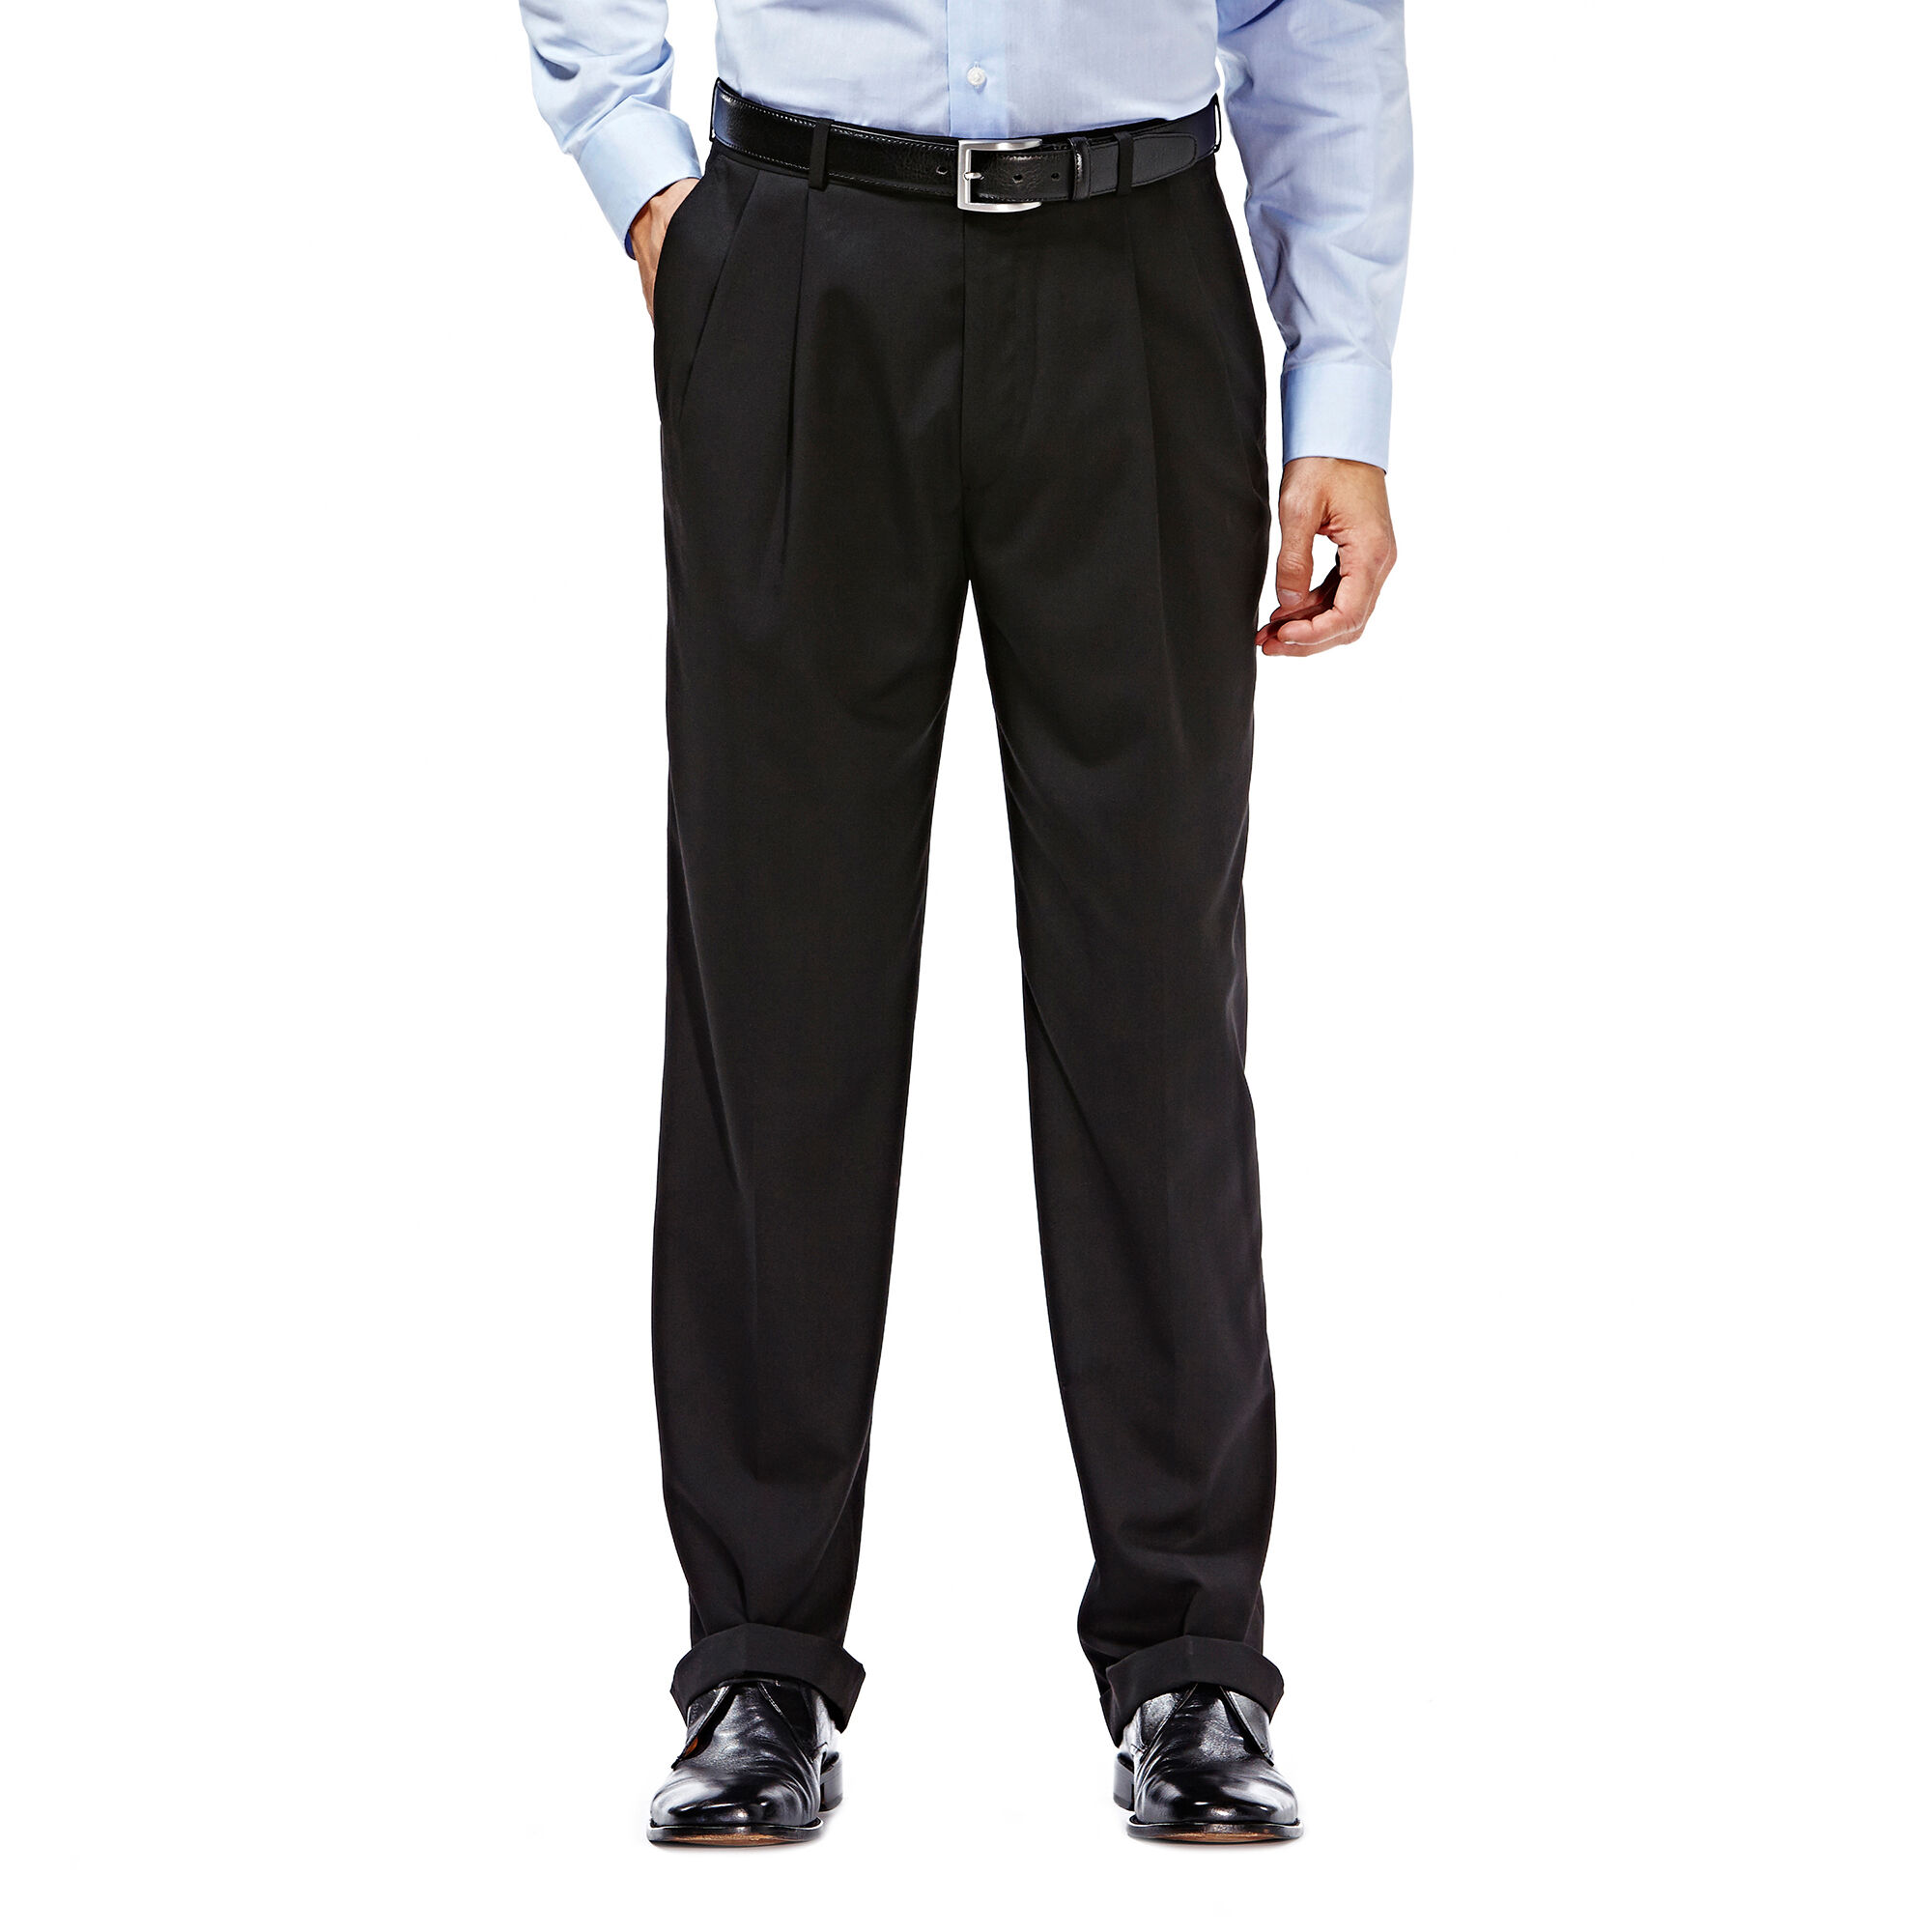 Haggar Suit Separates Pant - Pleated Front Black (HY00222 Clothing Pants) photo